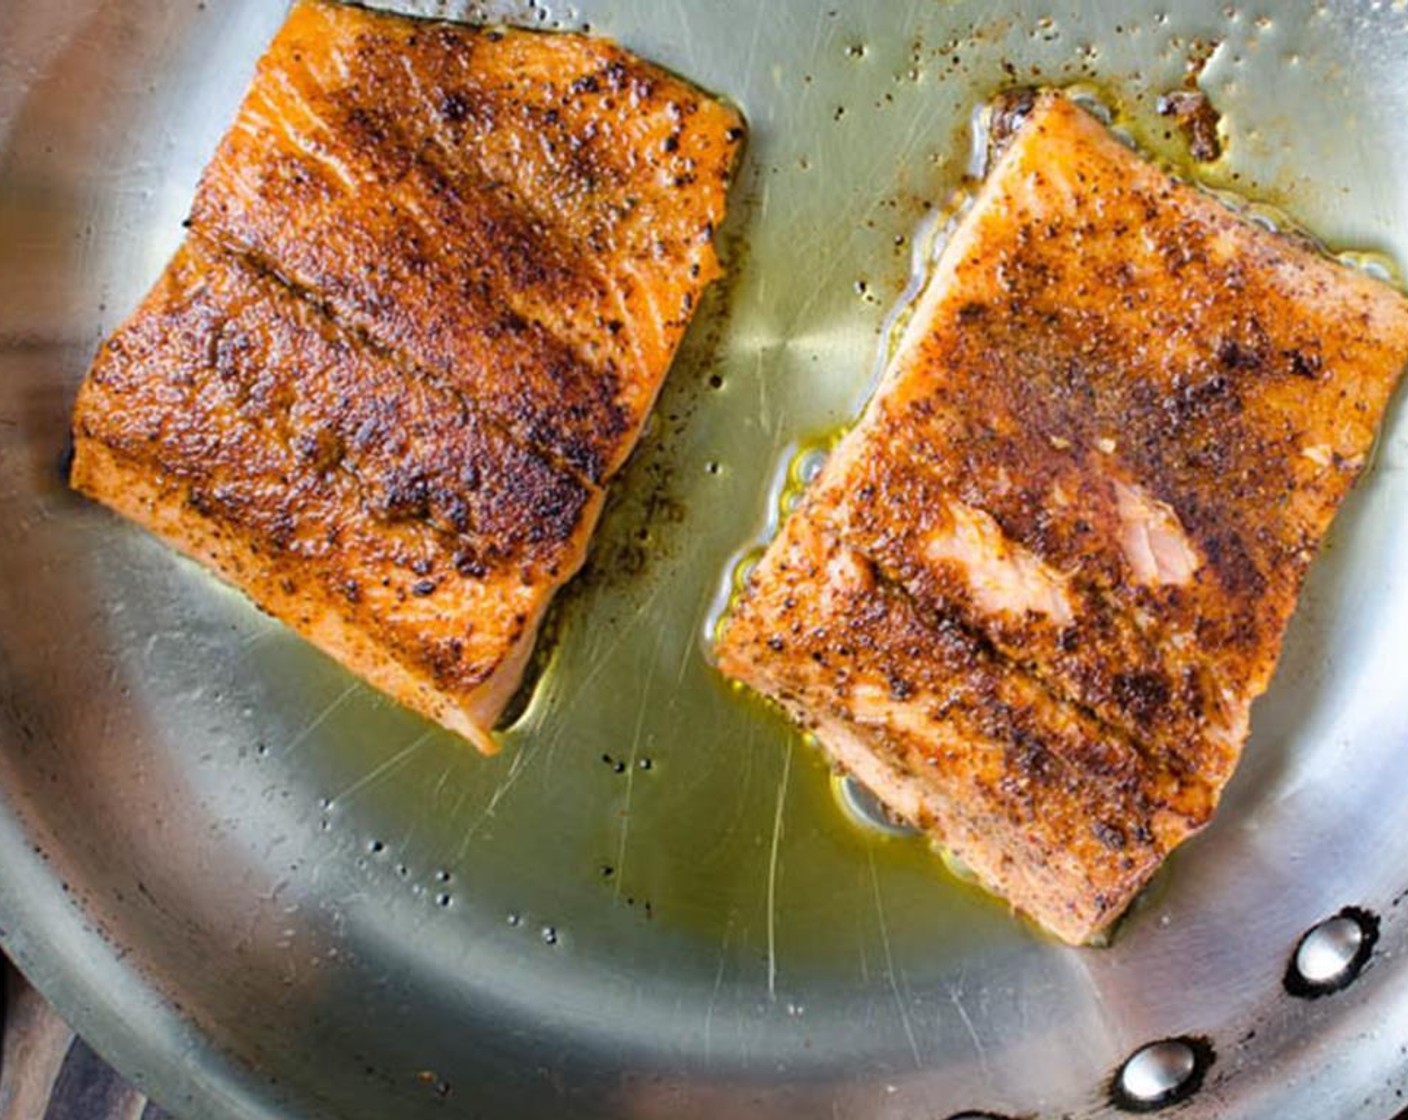 step 9 Add one tablespoon sesame oil to another pan over medium high heat. When pan is very hot, carefully place the salmon, flesh side down in the pan. Cook for 1-2 minutes.